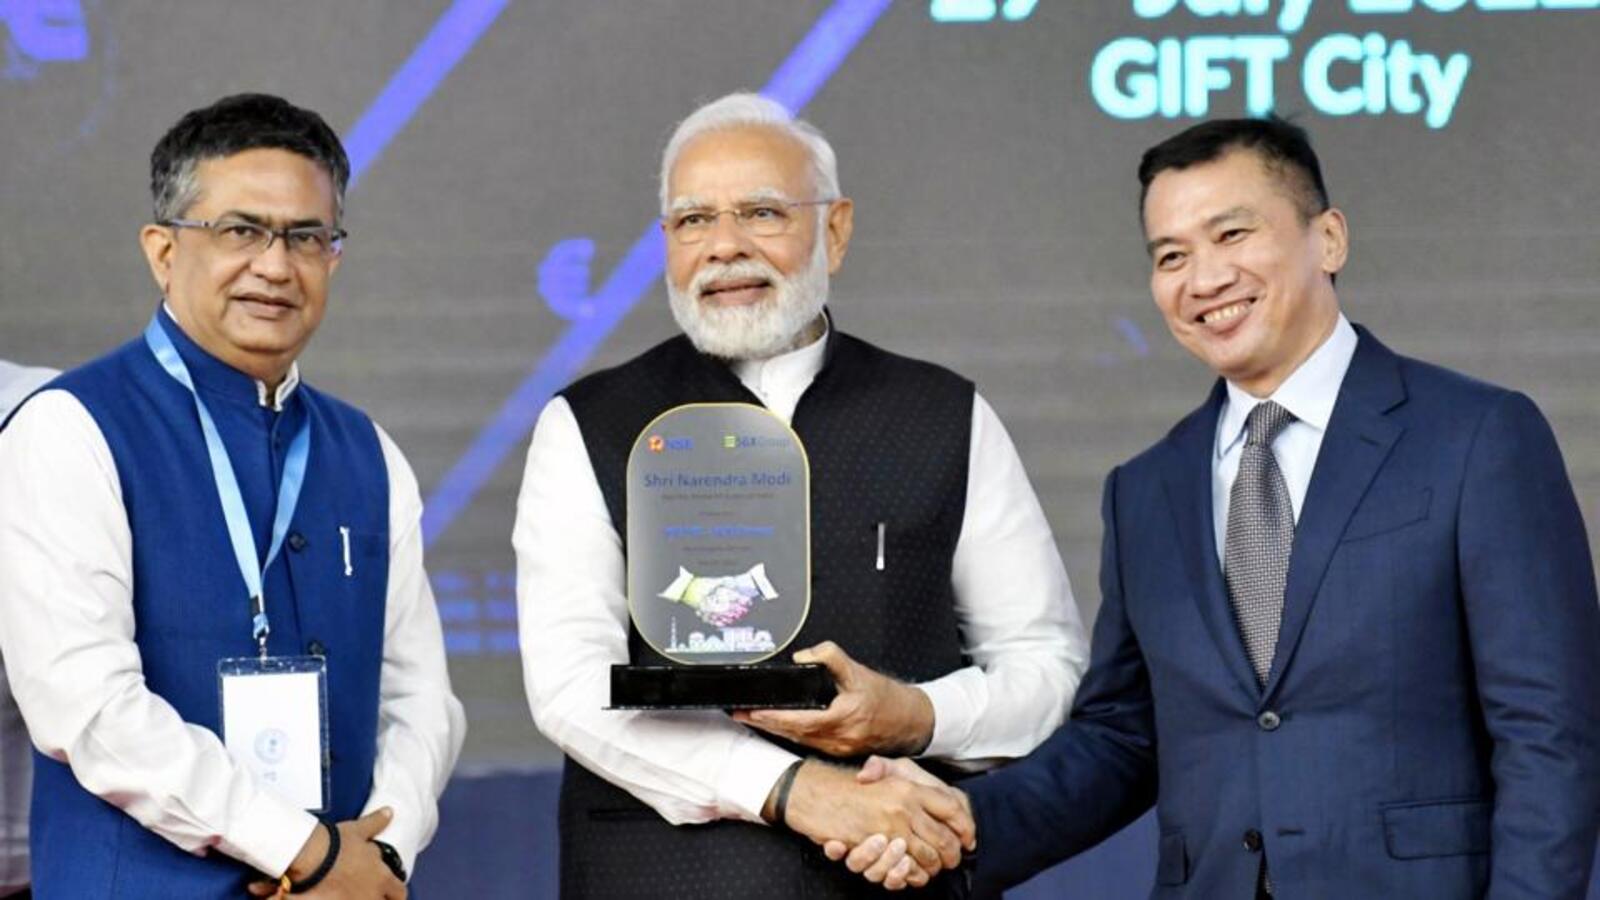 Are PM Modi's image on the gift bags provided at the FIFA World Cup 2022  opening ceremony in Qatar? - Fact Crescendo